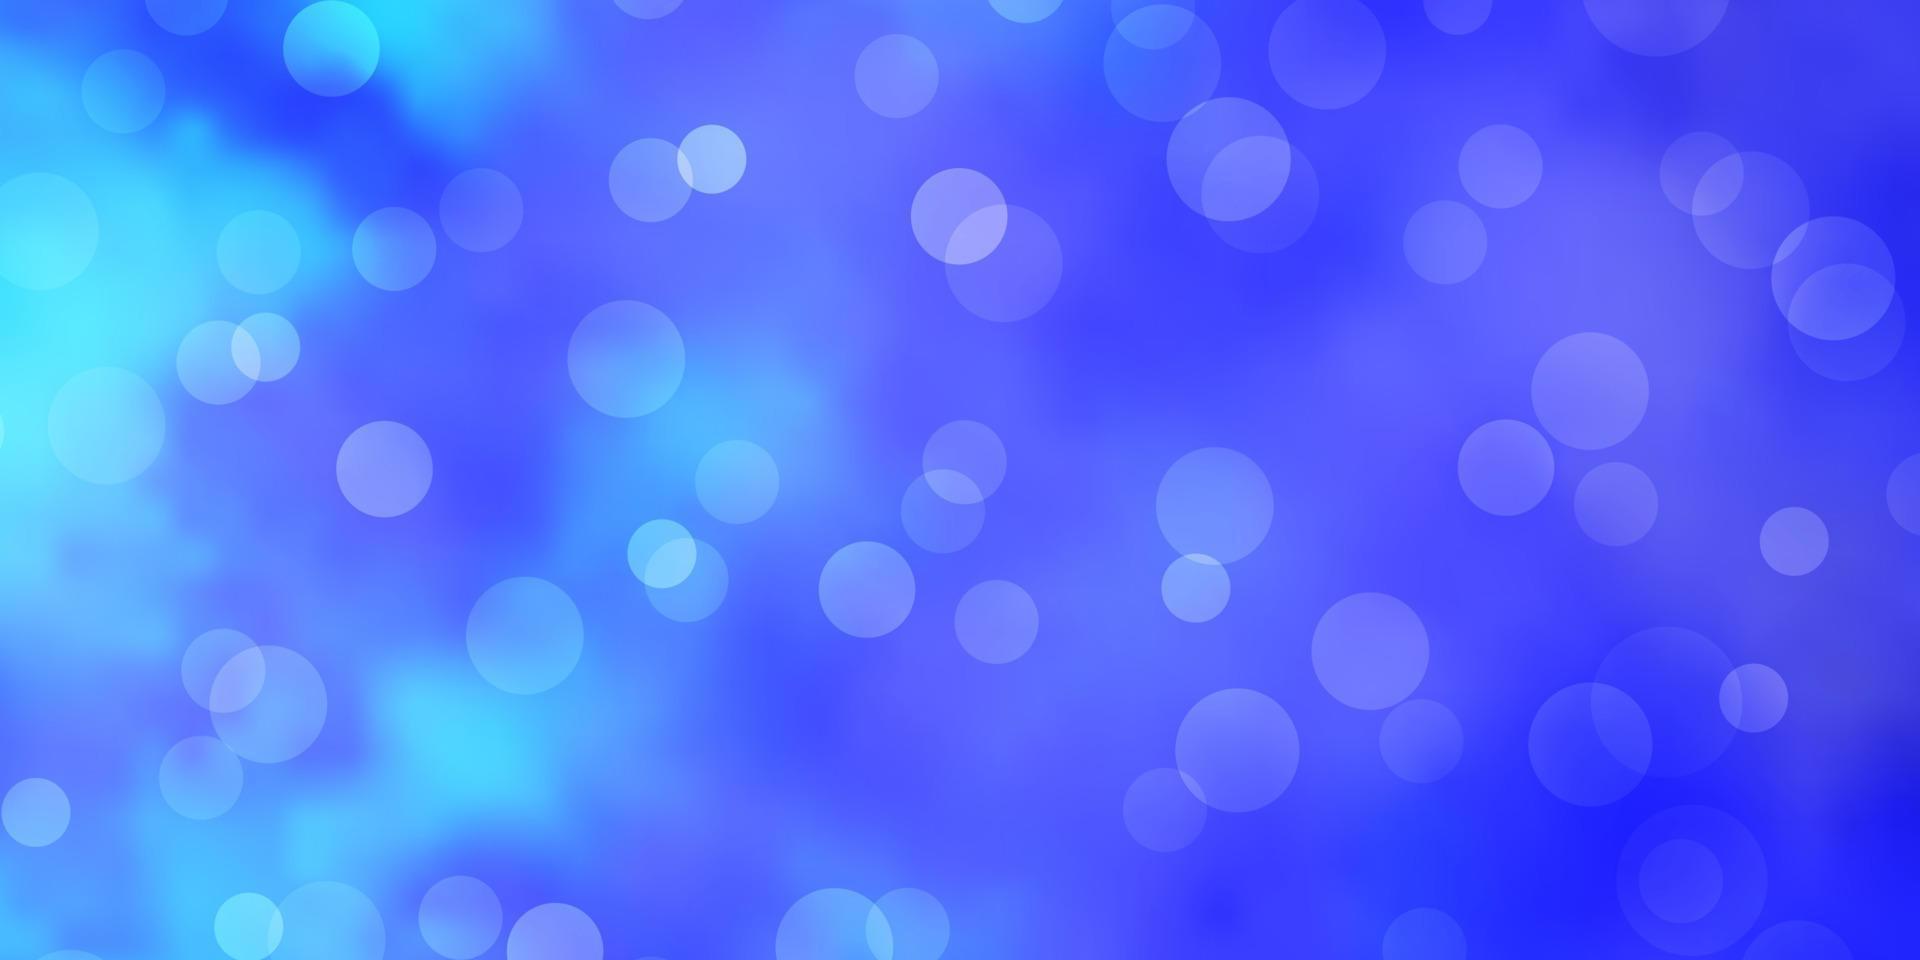 Light BLUE vector texture with circles.